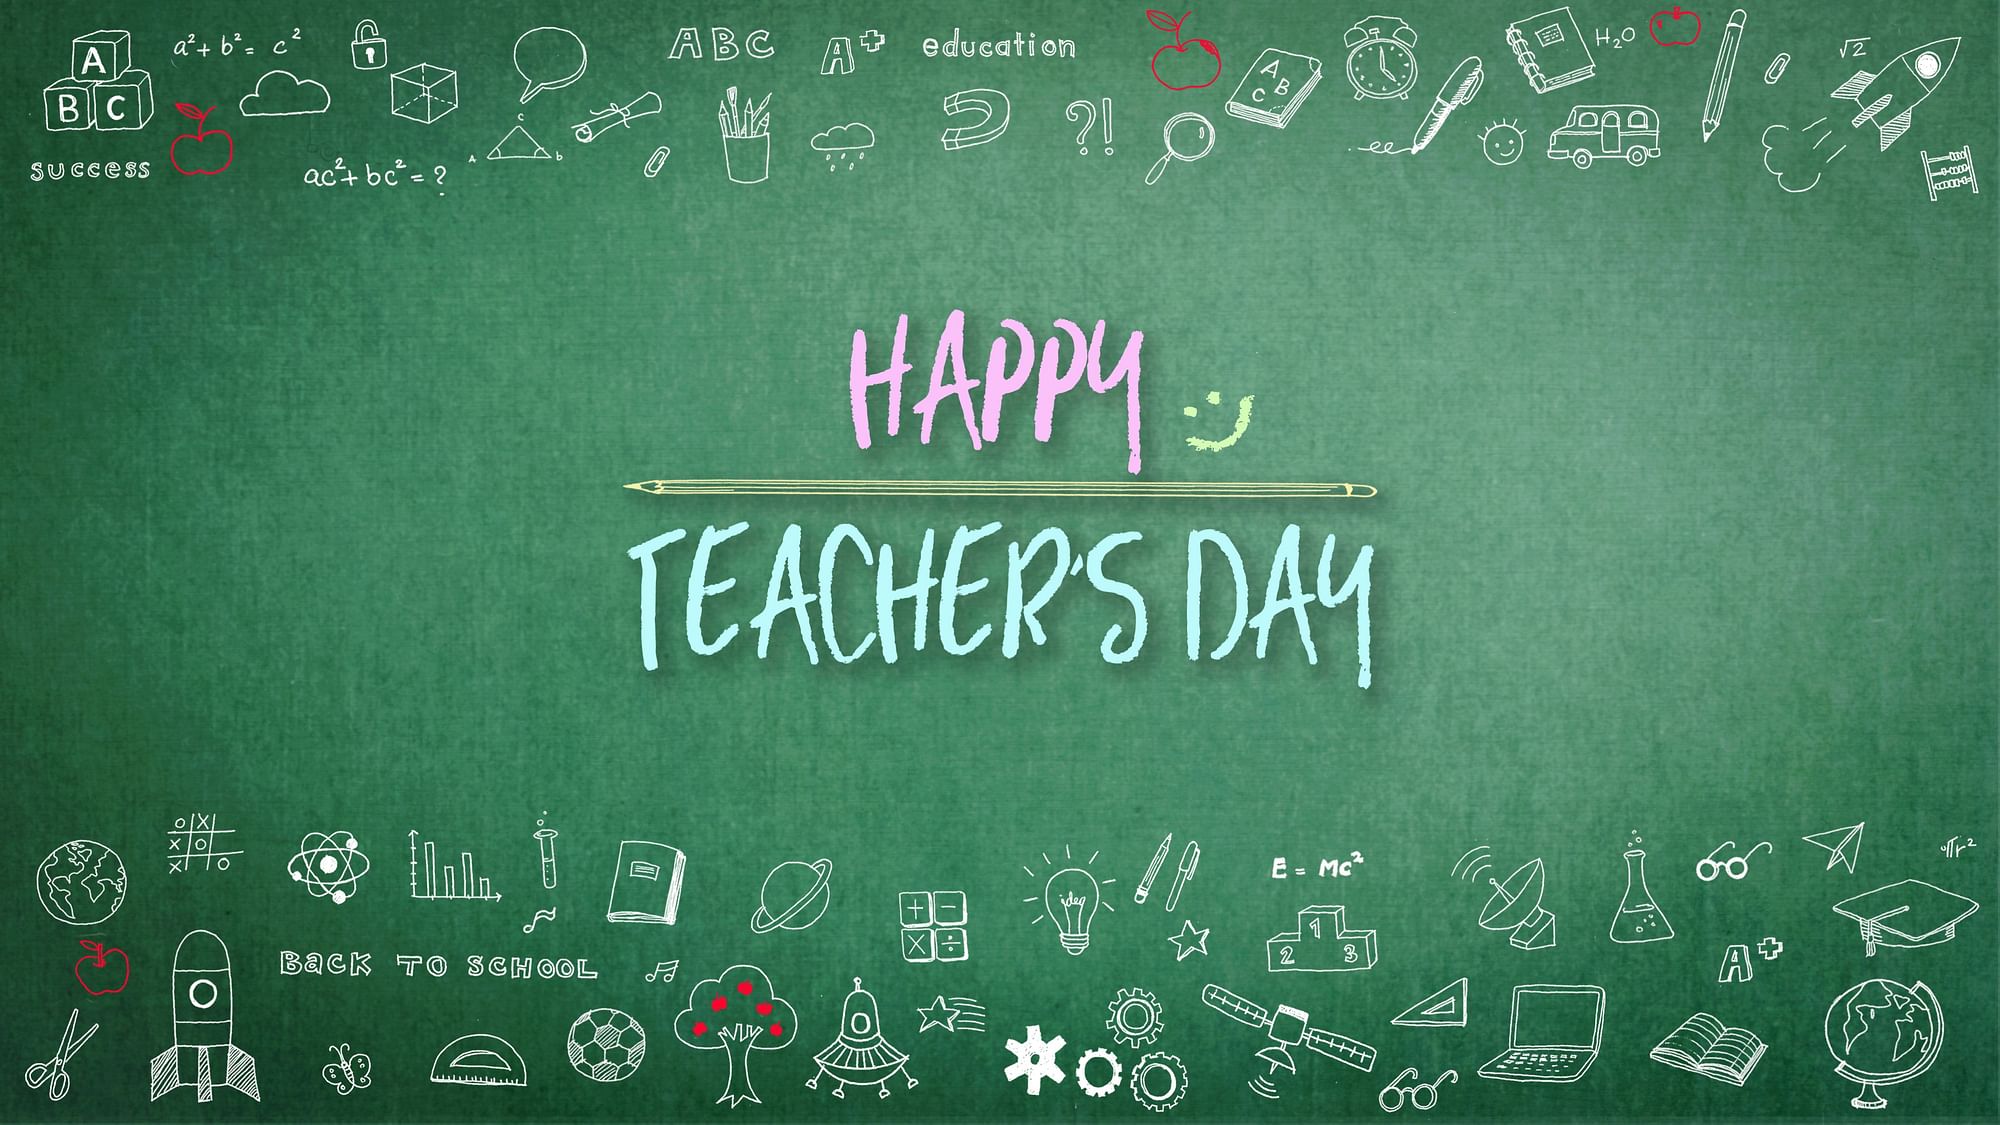 Happy Teachers’ Day Greetings 2019: Here are some wishes, images &amp; quotes to send your teachers today.